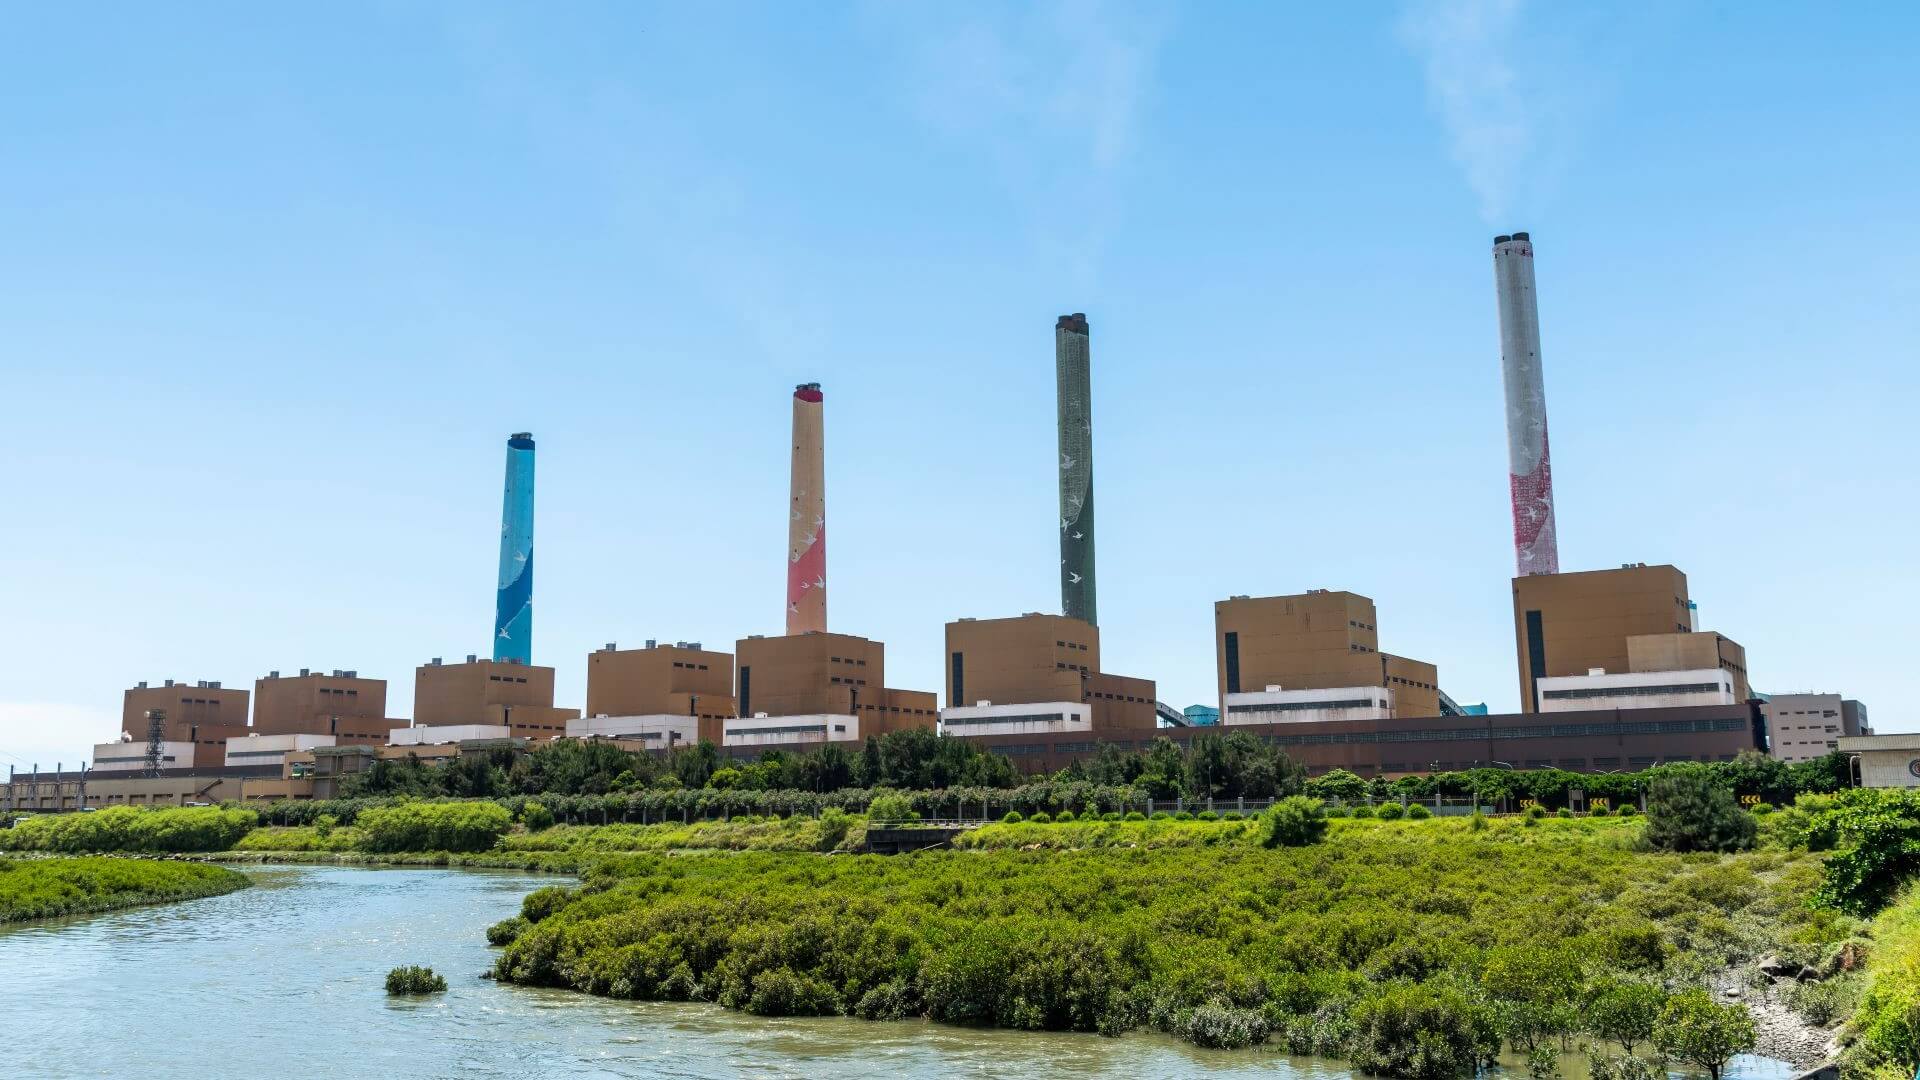 Row of coal plant and chimney set against blue sky, with water and green vegetation in foreground